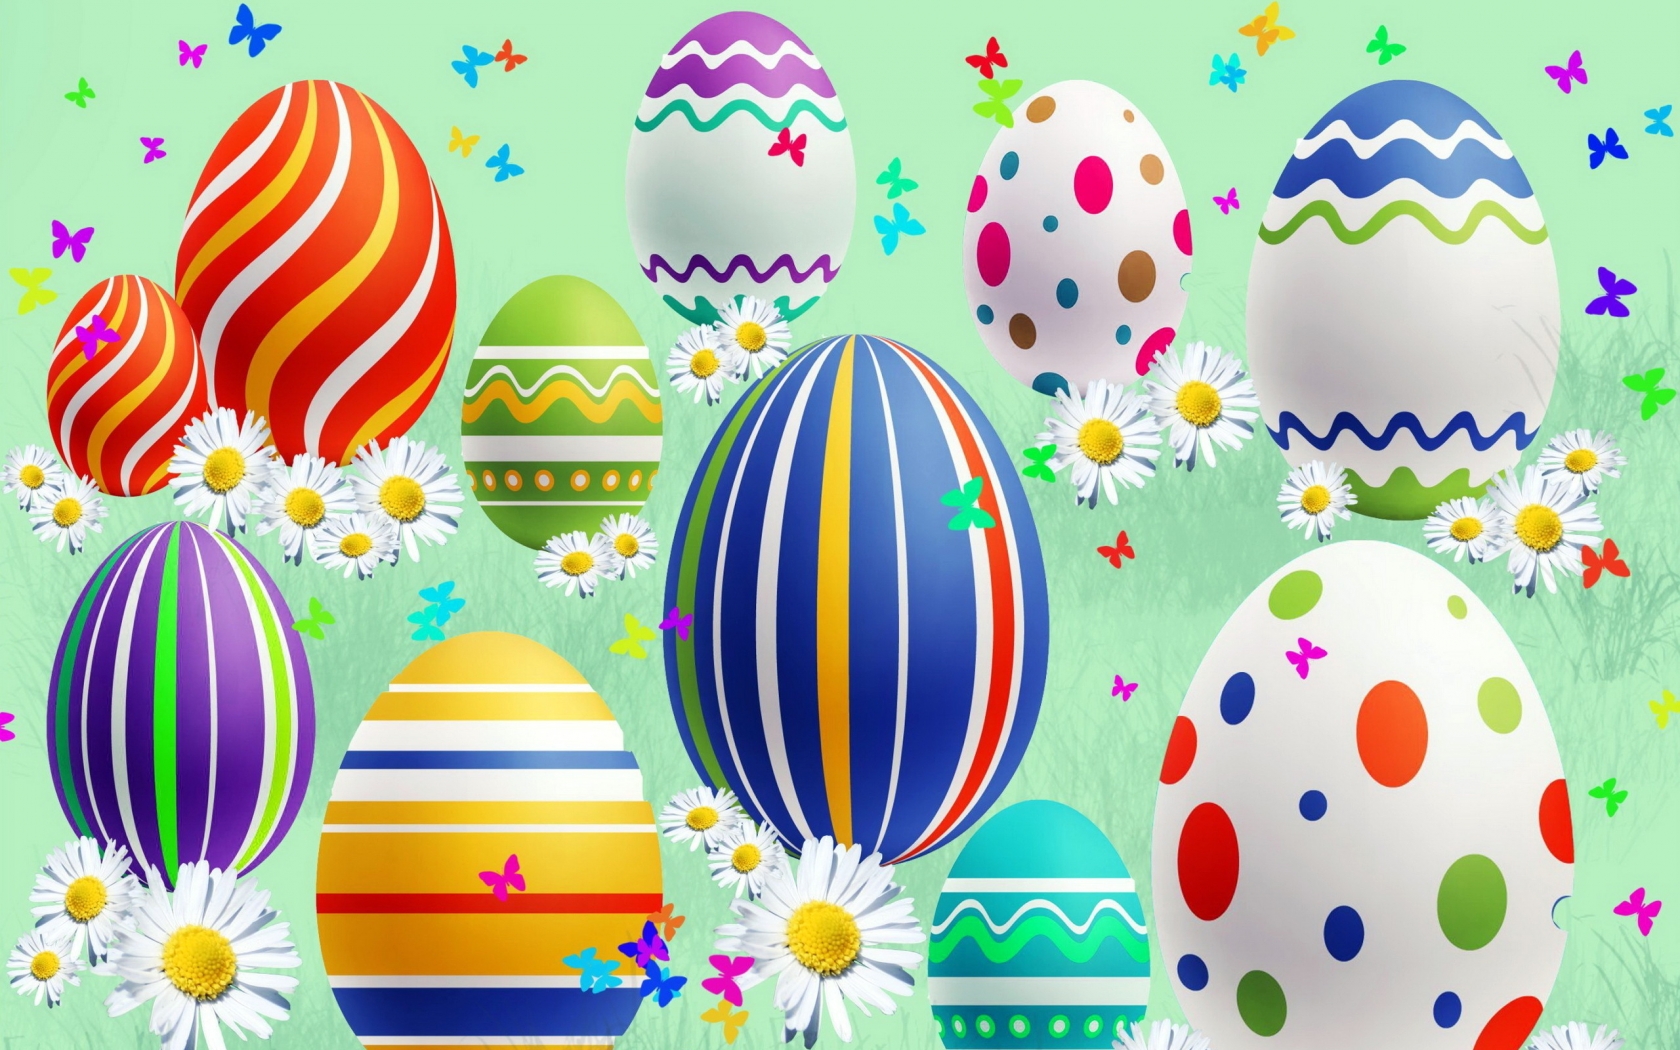 Lovely Easter Eggs for 1680 x 1050 widescreen resolution